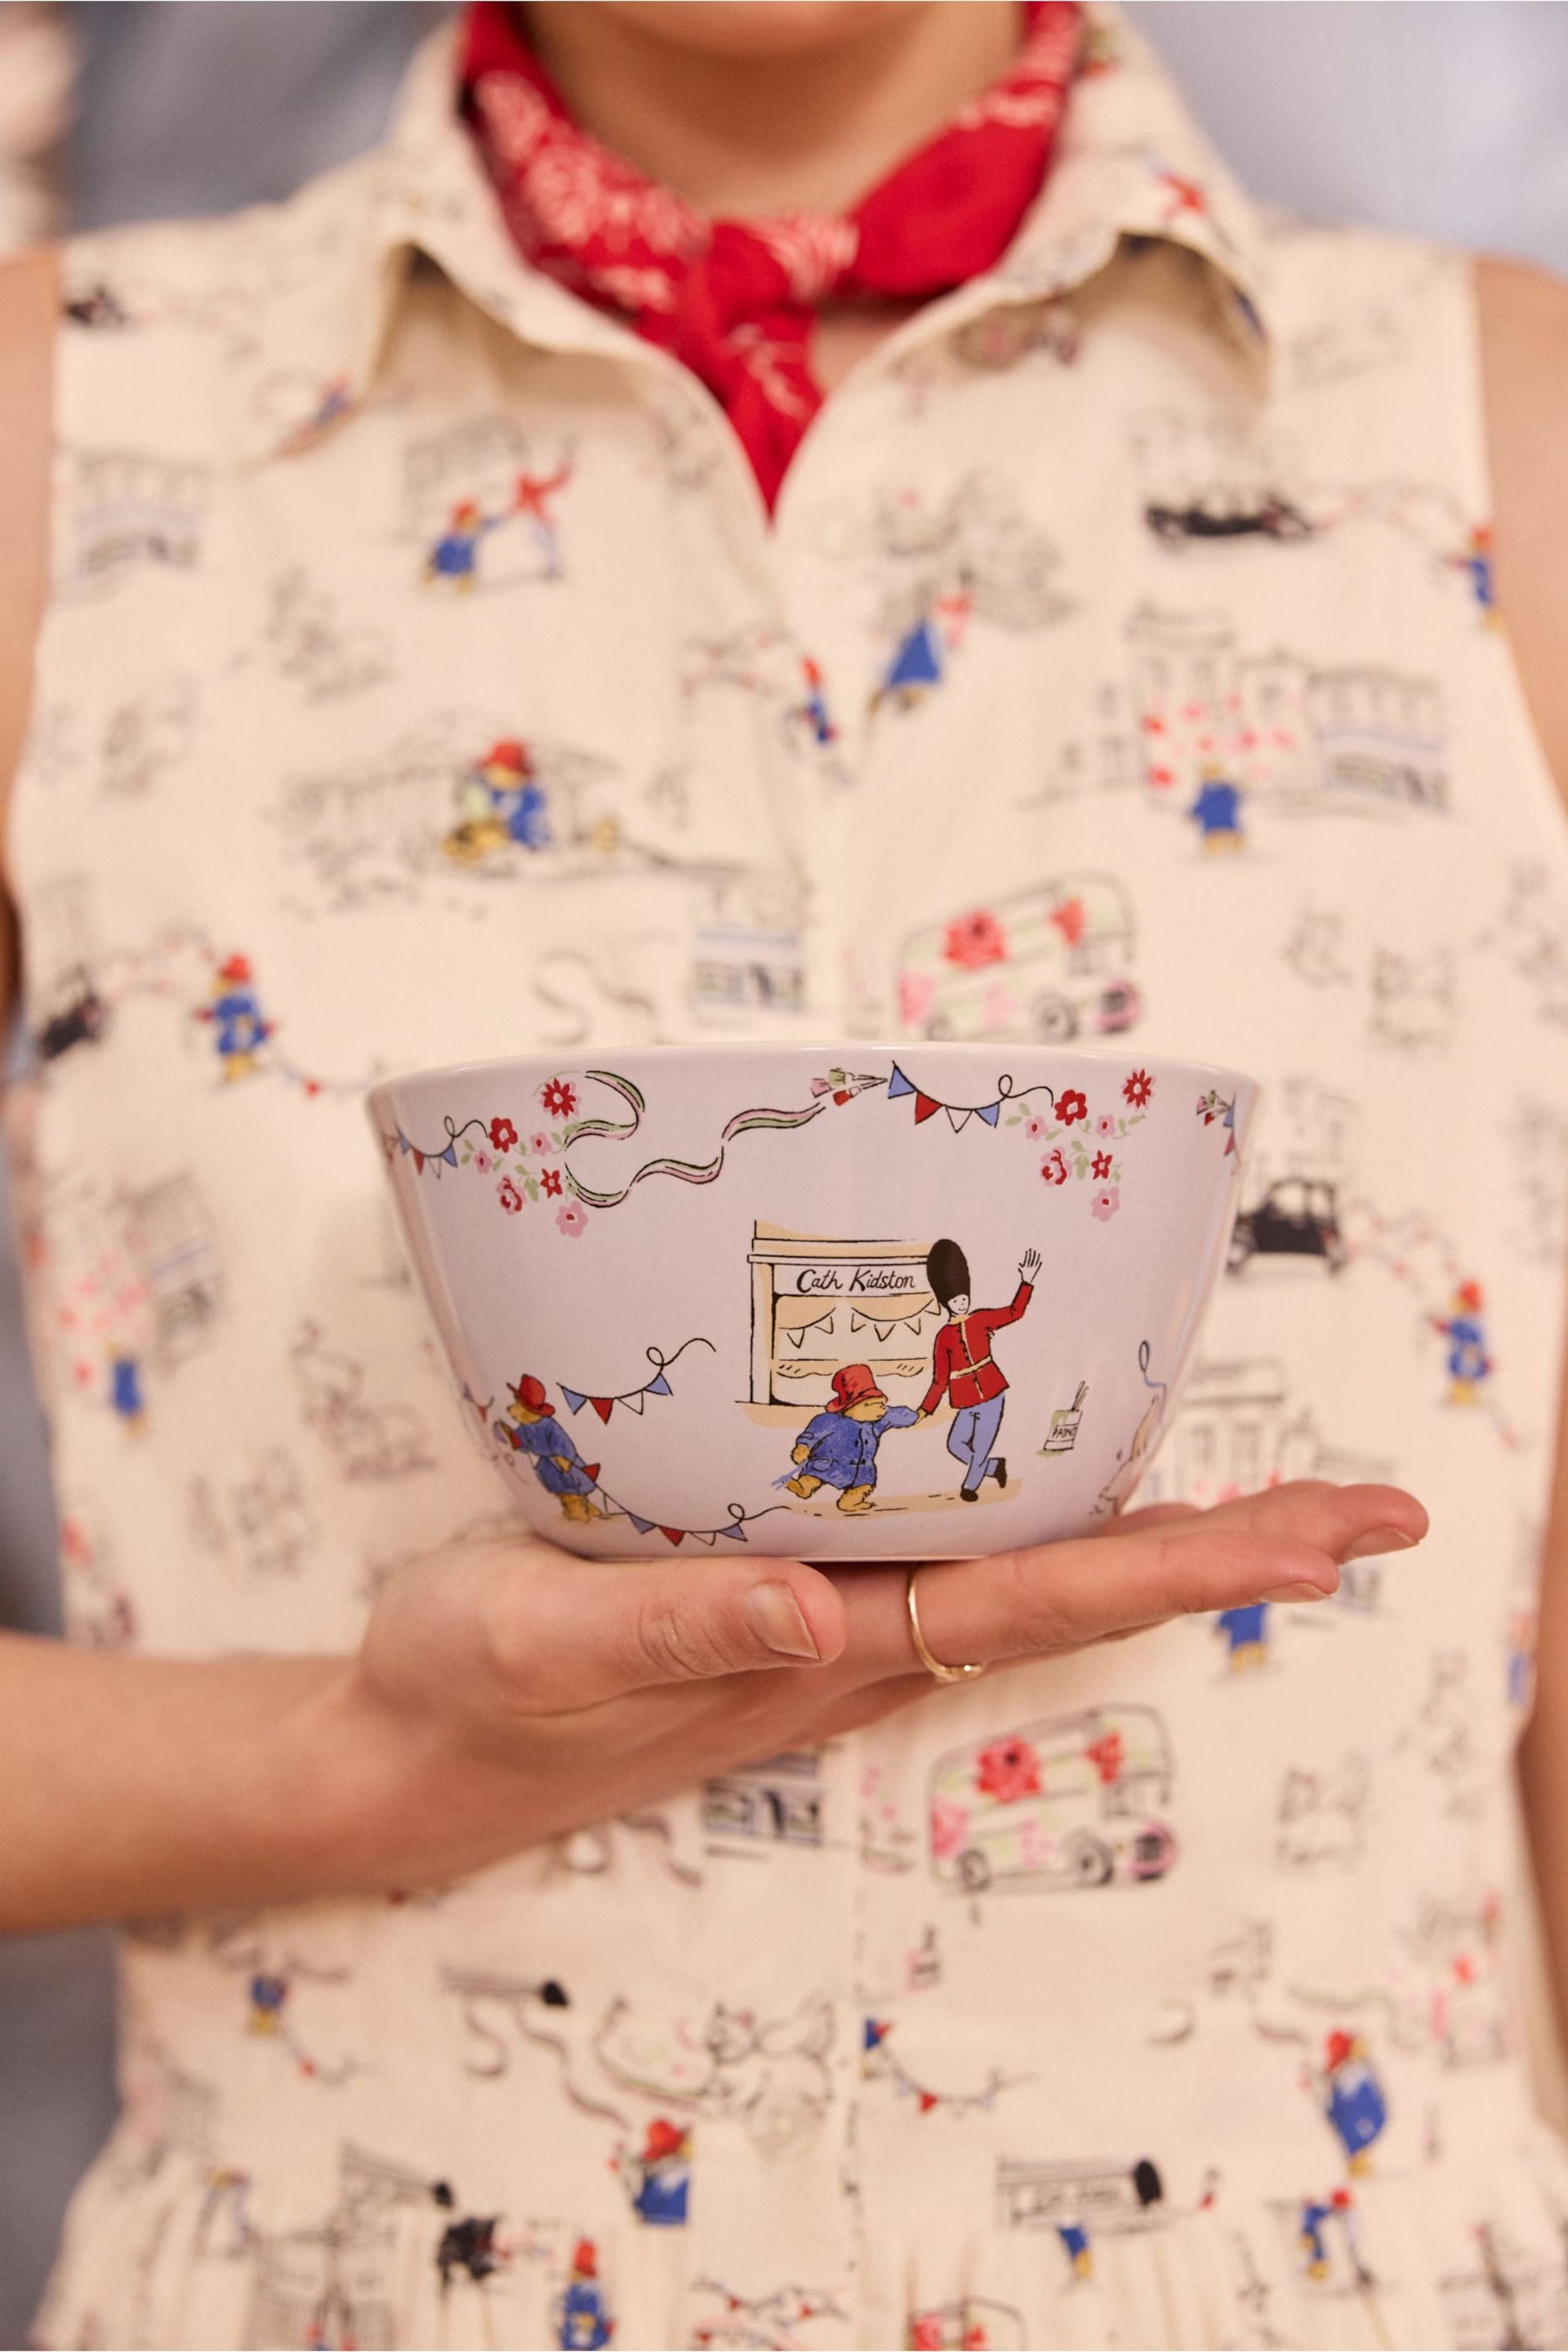 Cath Kidston Multi Paddington Goes to Town Side Plate - Image 7 of 15